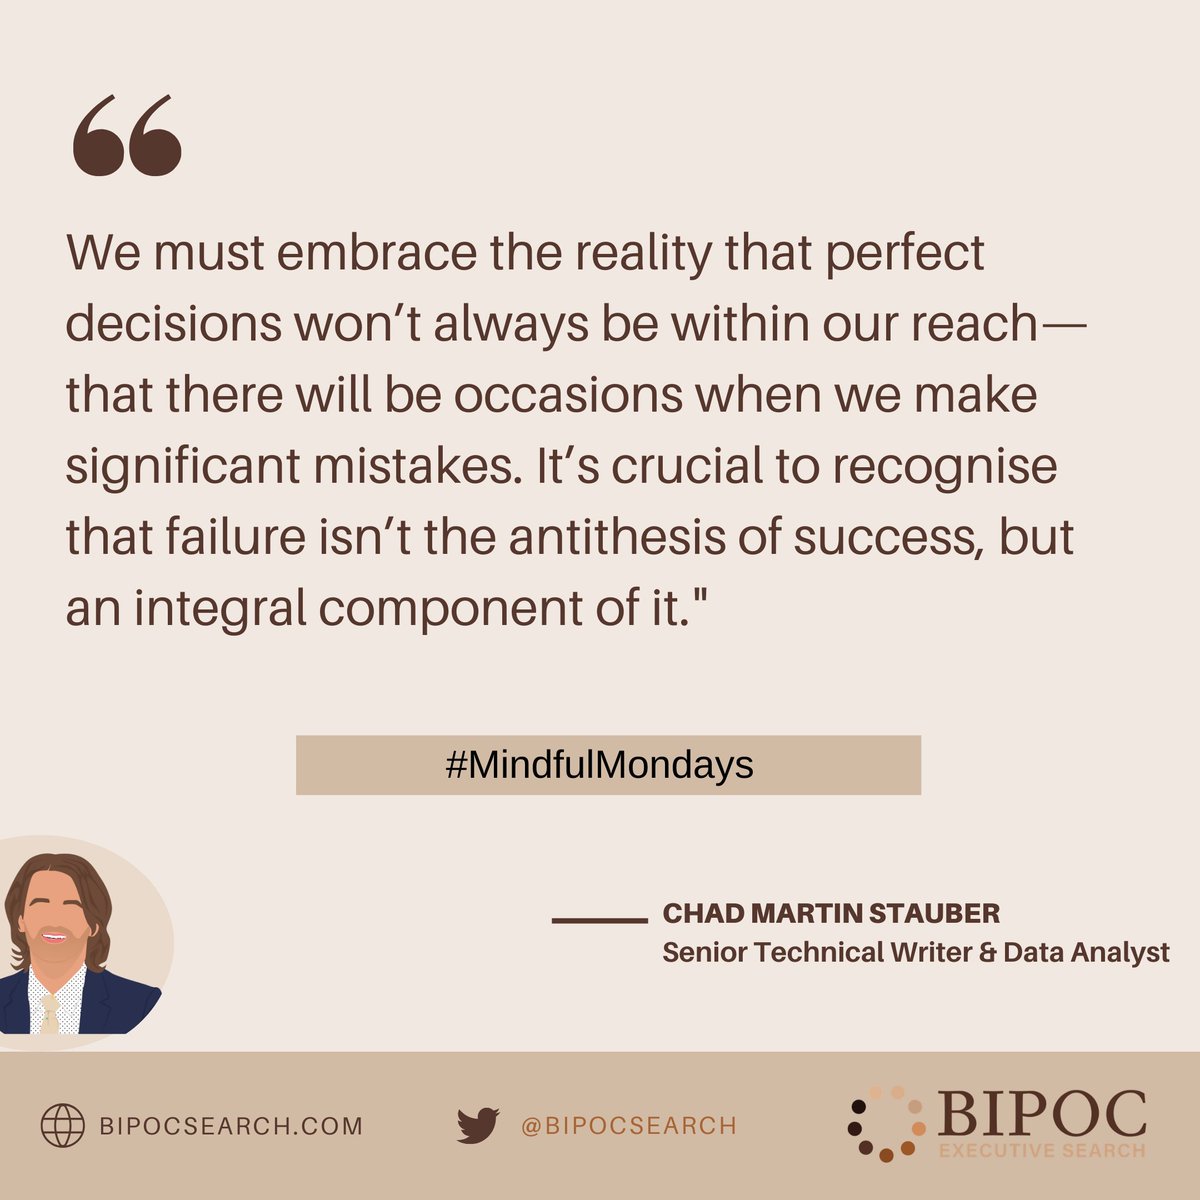 Our Senior Technical Writer & Data Analyst, Chad Martin Stauber, reminds us making mistakes is essential for success; it's a valuable learning process.

#MindfulMondays #MindfulQuote #ExperiencesThatMatter #ConversationStarters #BipocExecutiveSearch #ChadMartinStauber